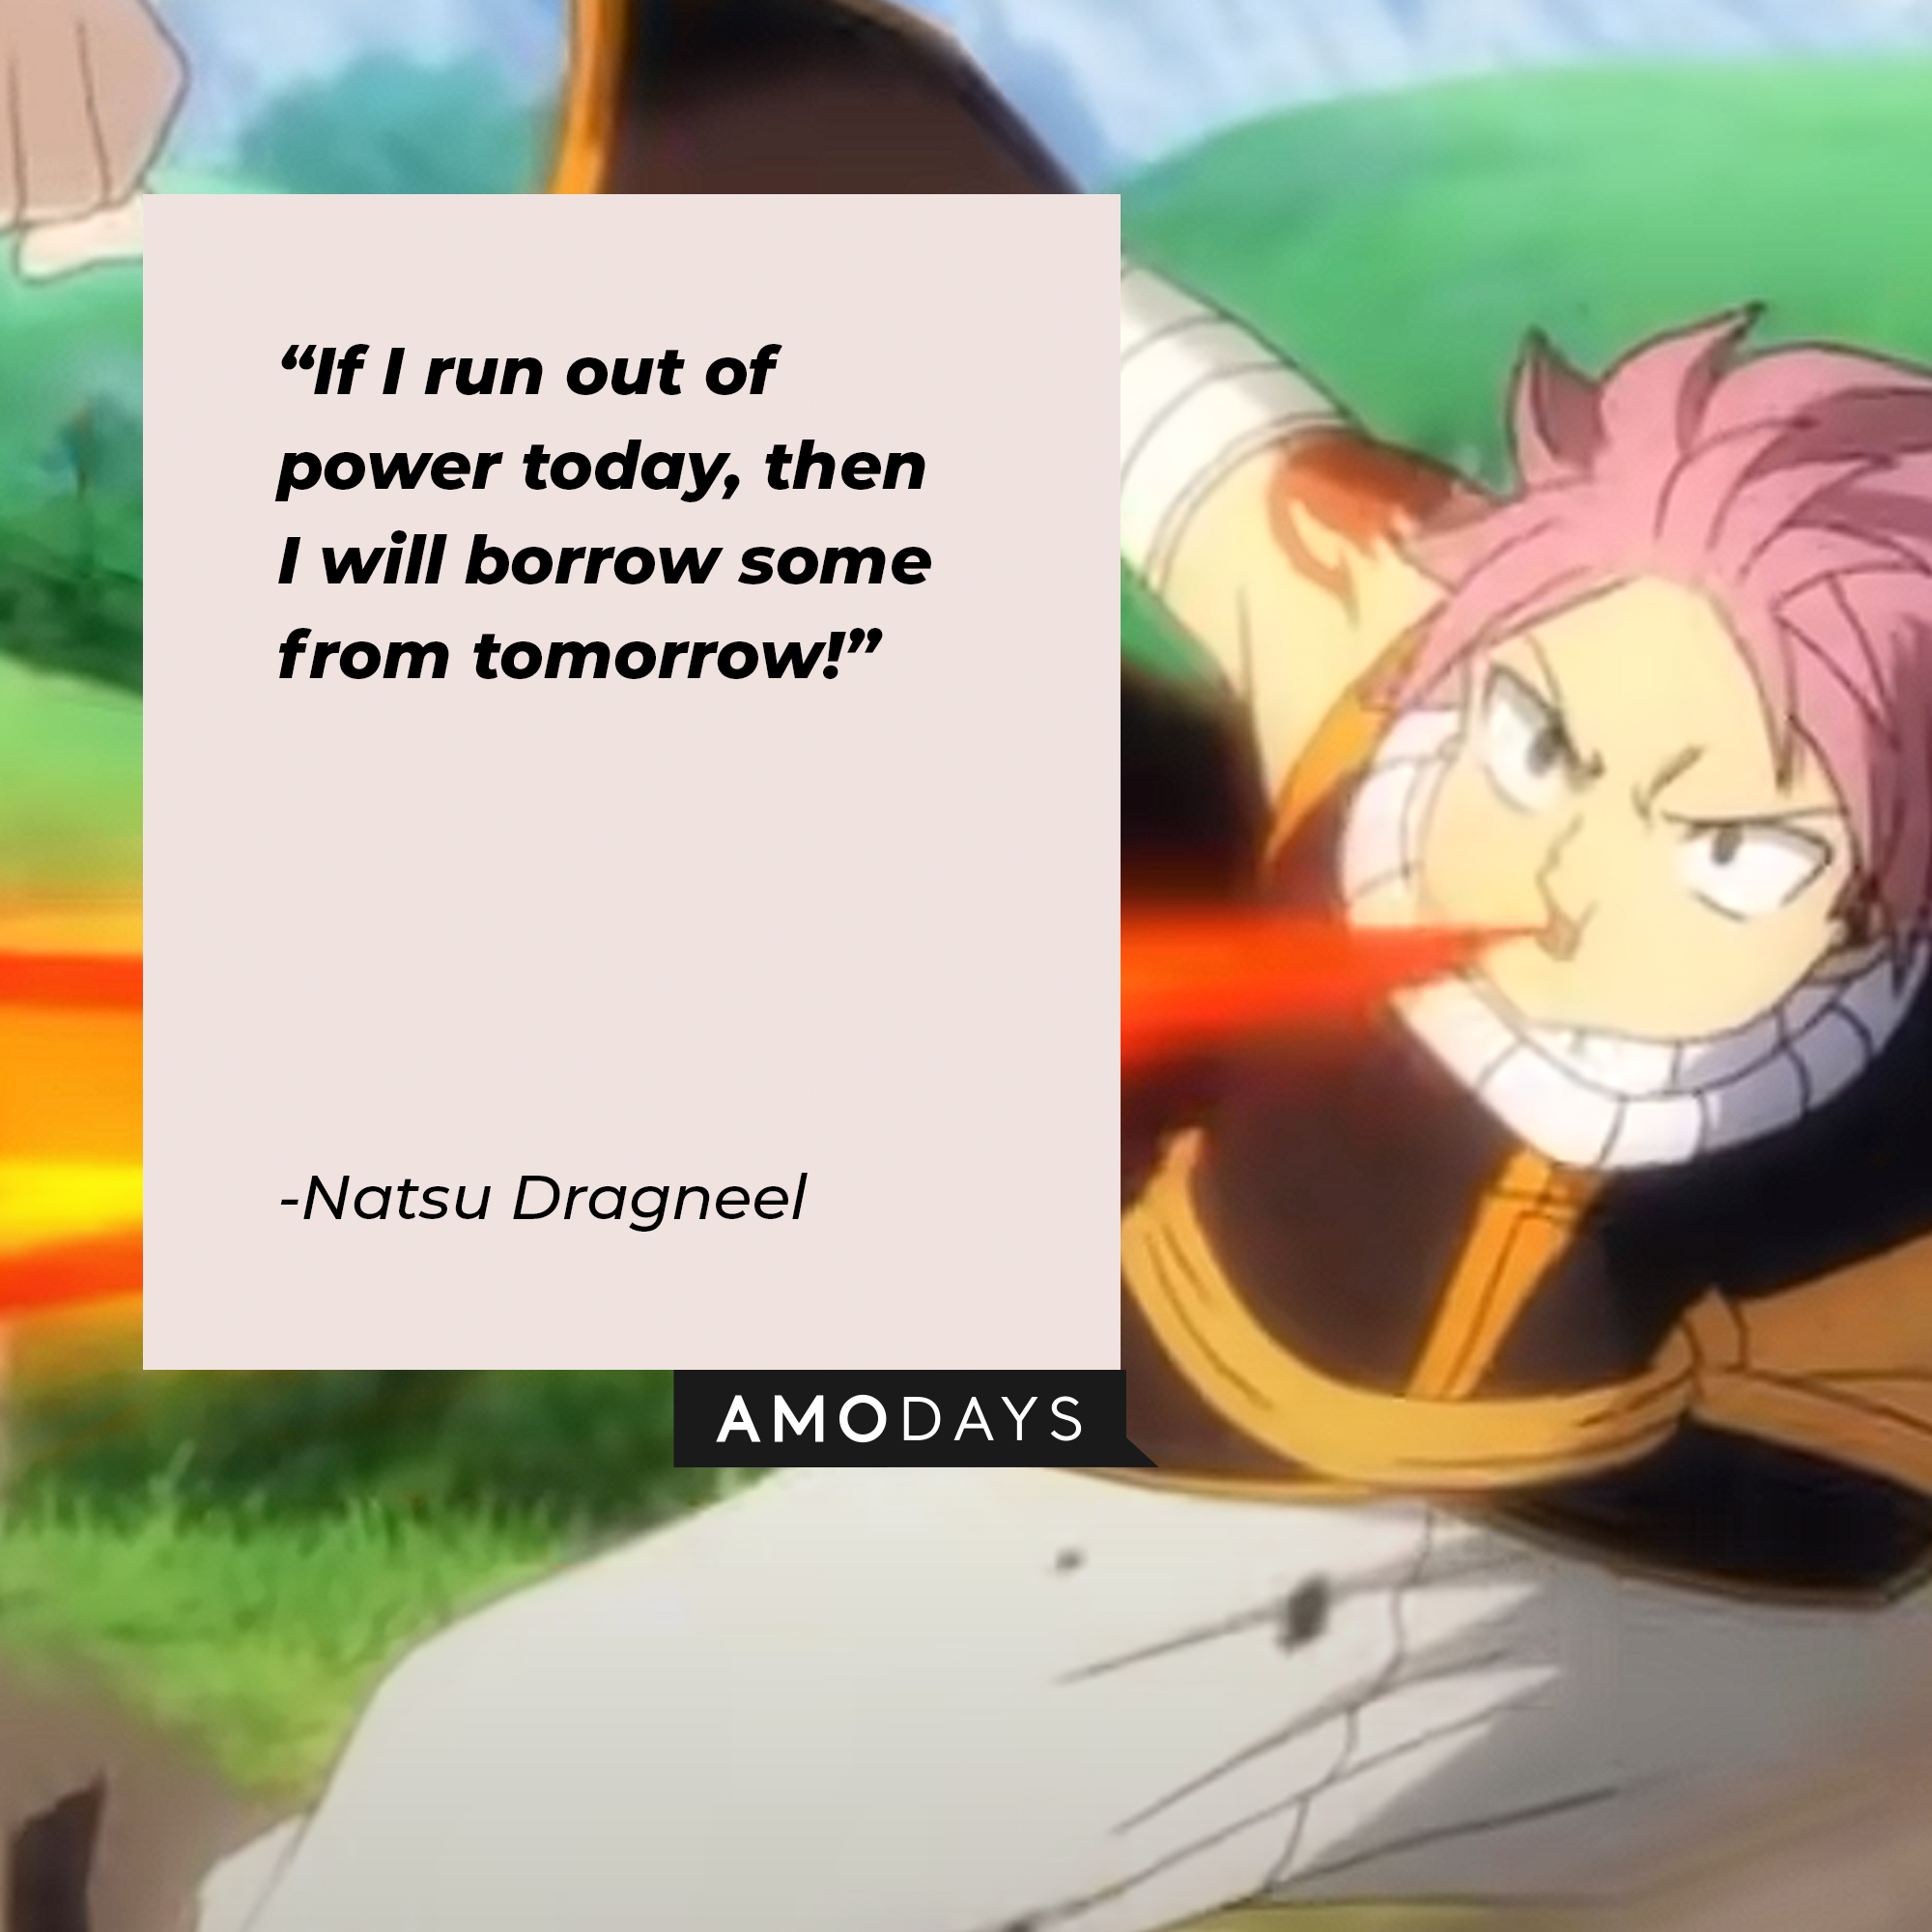 Natsu Dragneel's quote: "If I run out of power today, then I will borrow some from tomorrow!" | Image: AmoDays